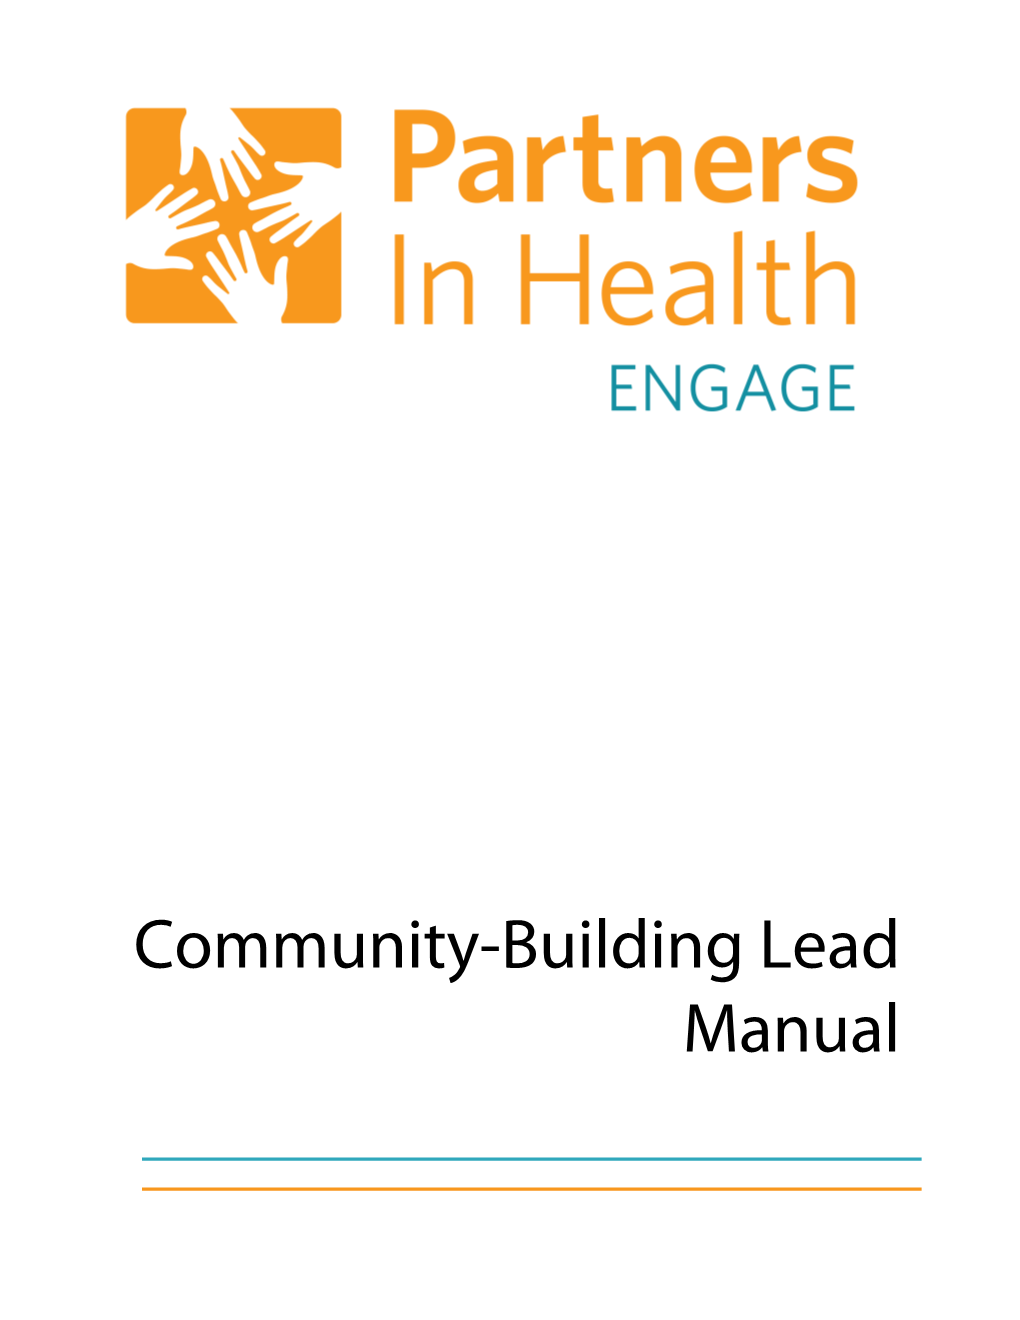 Community-Building Lead Manual Table of Contents